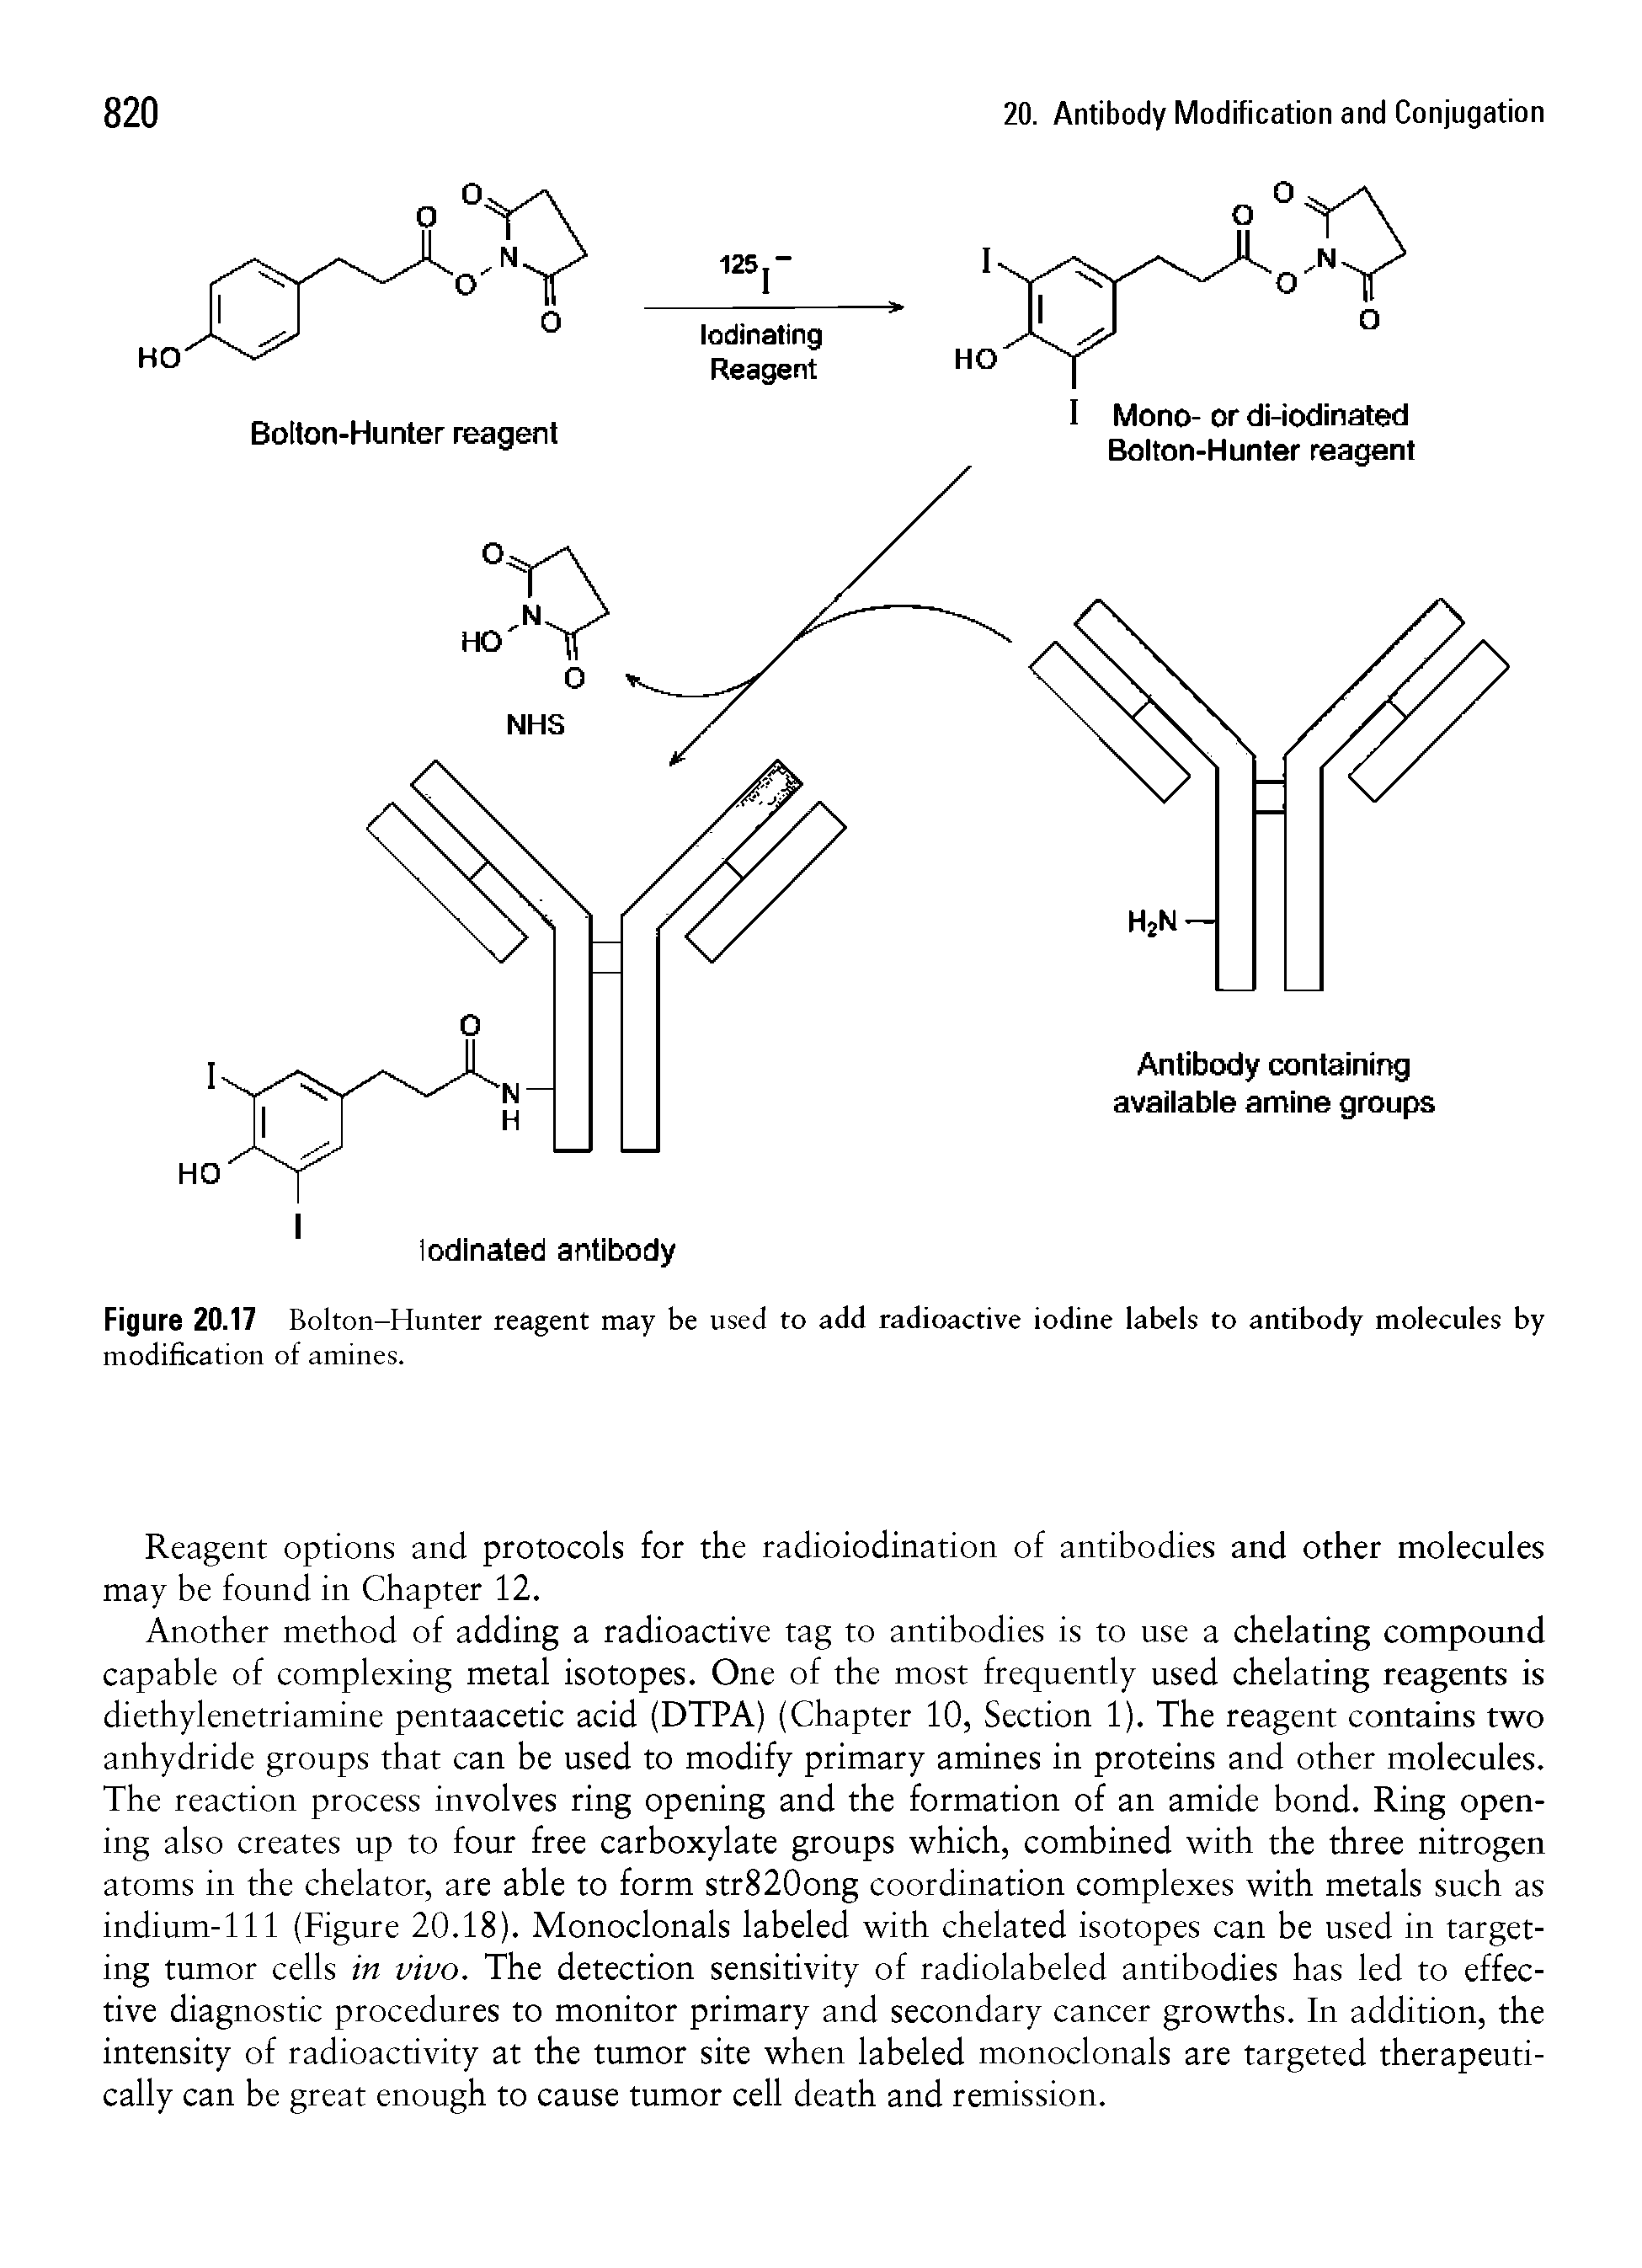 Figure 20.17 Bolton-Hunter reagent may be used to add radioactive iodine labels to antibody molecules by modification of amines.